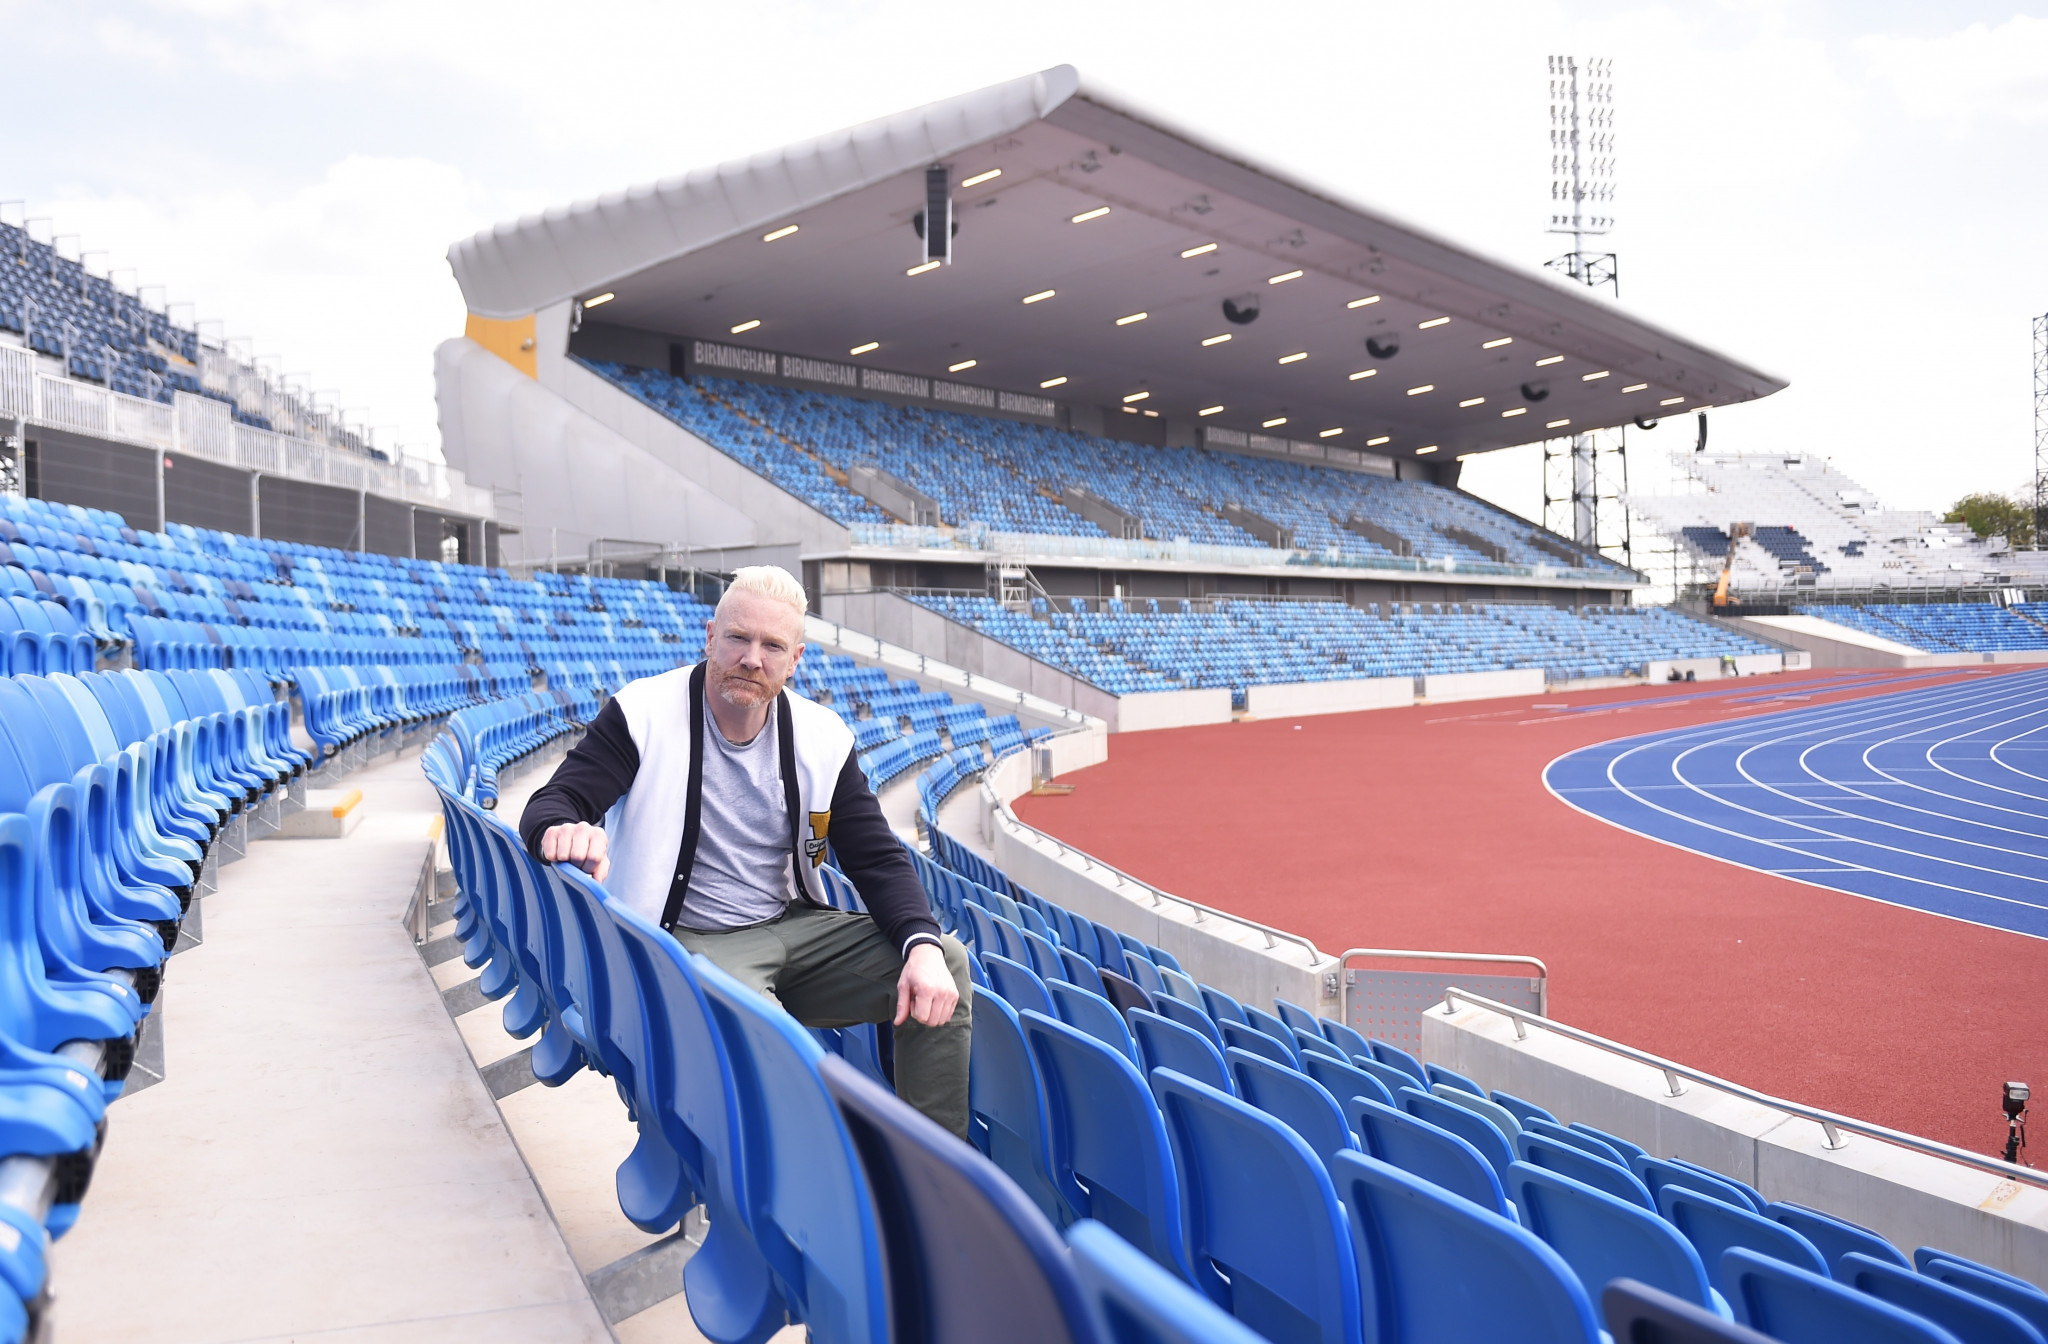 Iwan Thomas said he was blown away by the transformation of the Alexander Stadium ©British Athletics and Getty Images